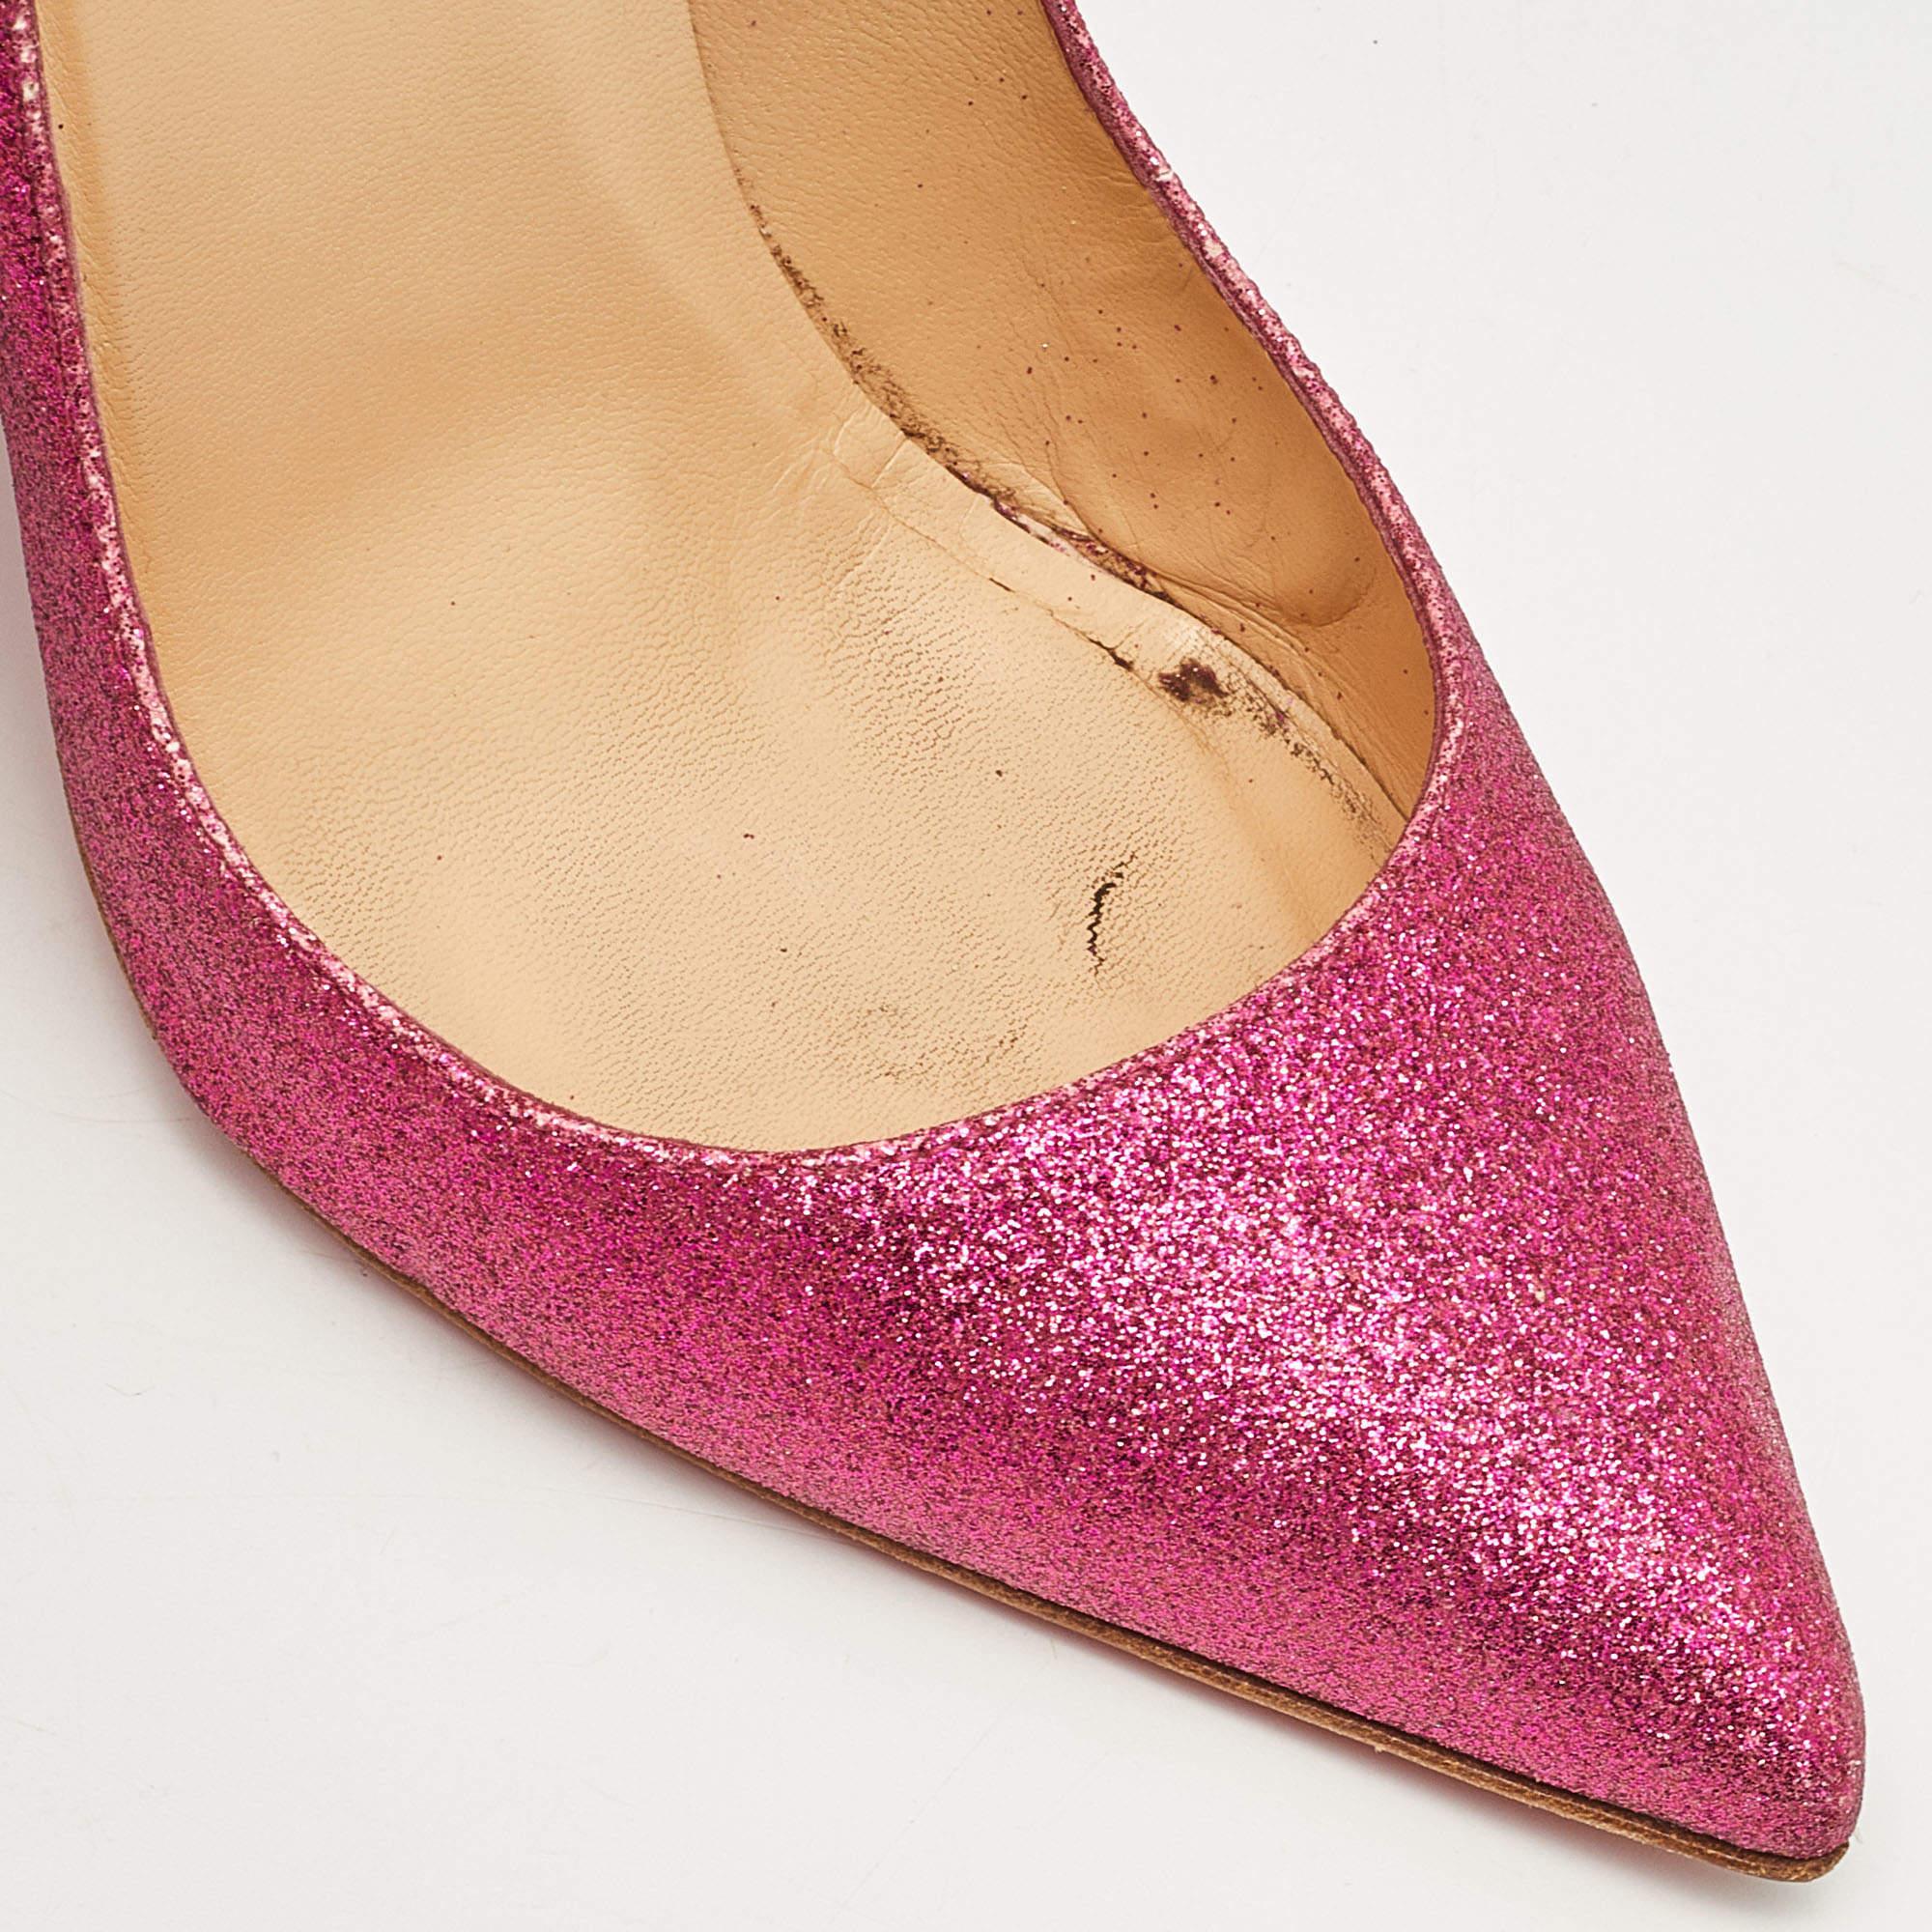 Christian Louboutin Pink Glitter Pigalle Pumps Size 39.5 4